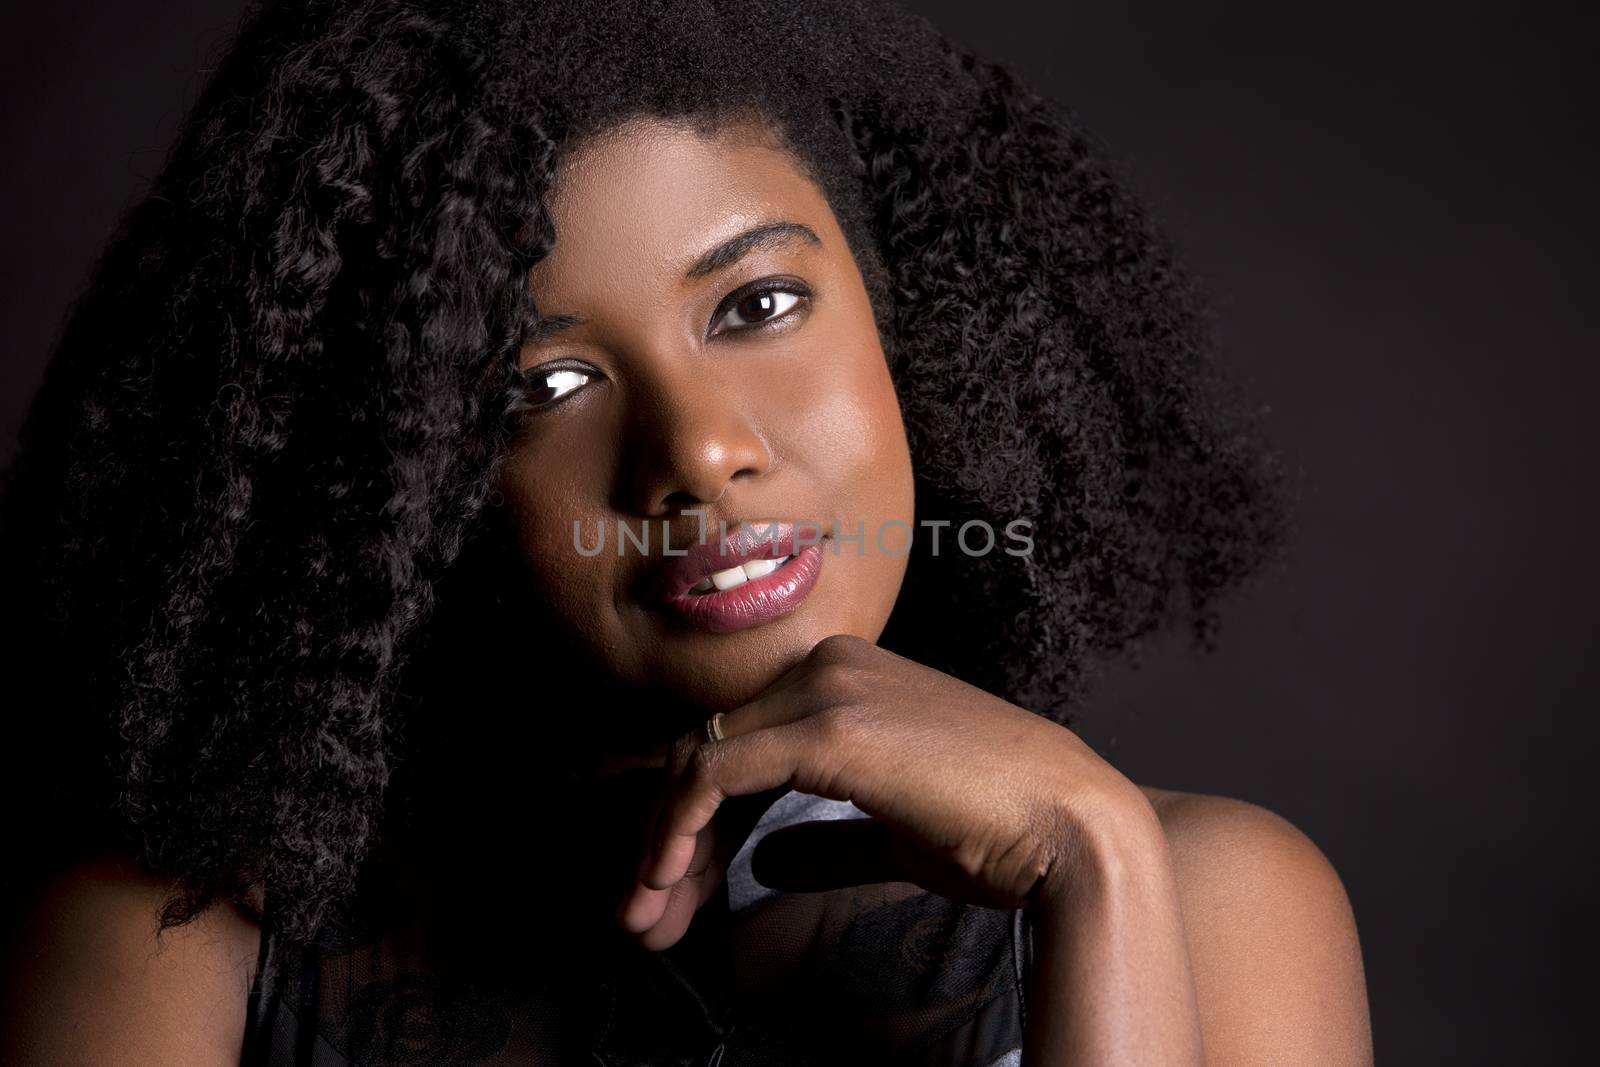 beautiful young black woman is wearing dark dress on grey background